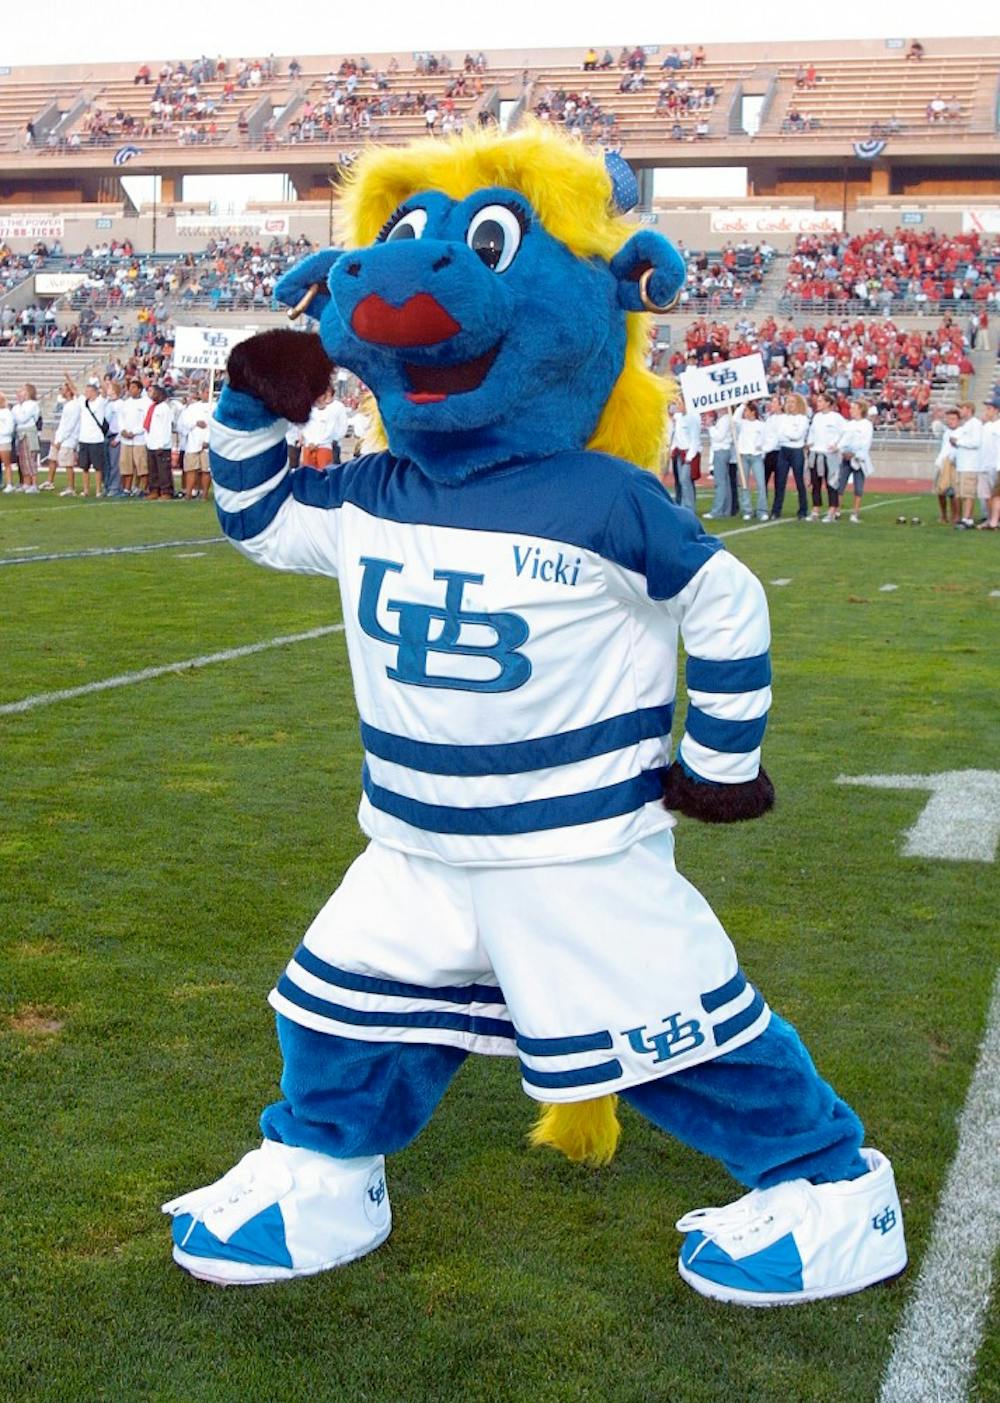 <p>Victoria S. Bull flexes her muscles during her first appearance at a UB Football game against the Rutgers Scarlet Knights in Aug. 2001. Victoria debuted during the 2001-02 academic year, but fans have not seen Victoria in roughly eight years.</p>